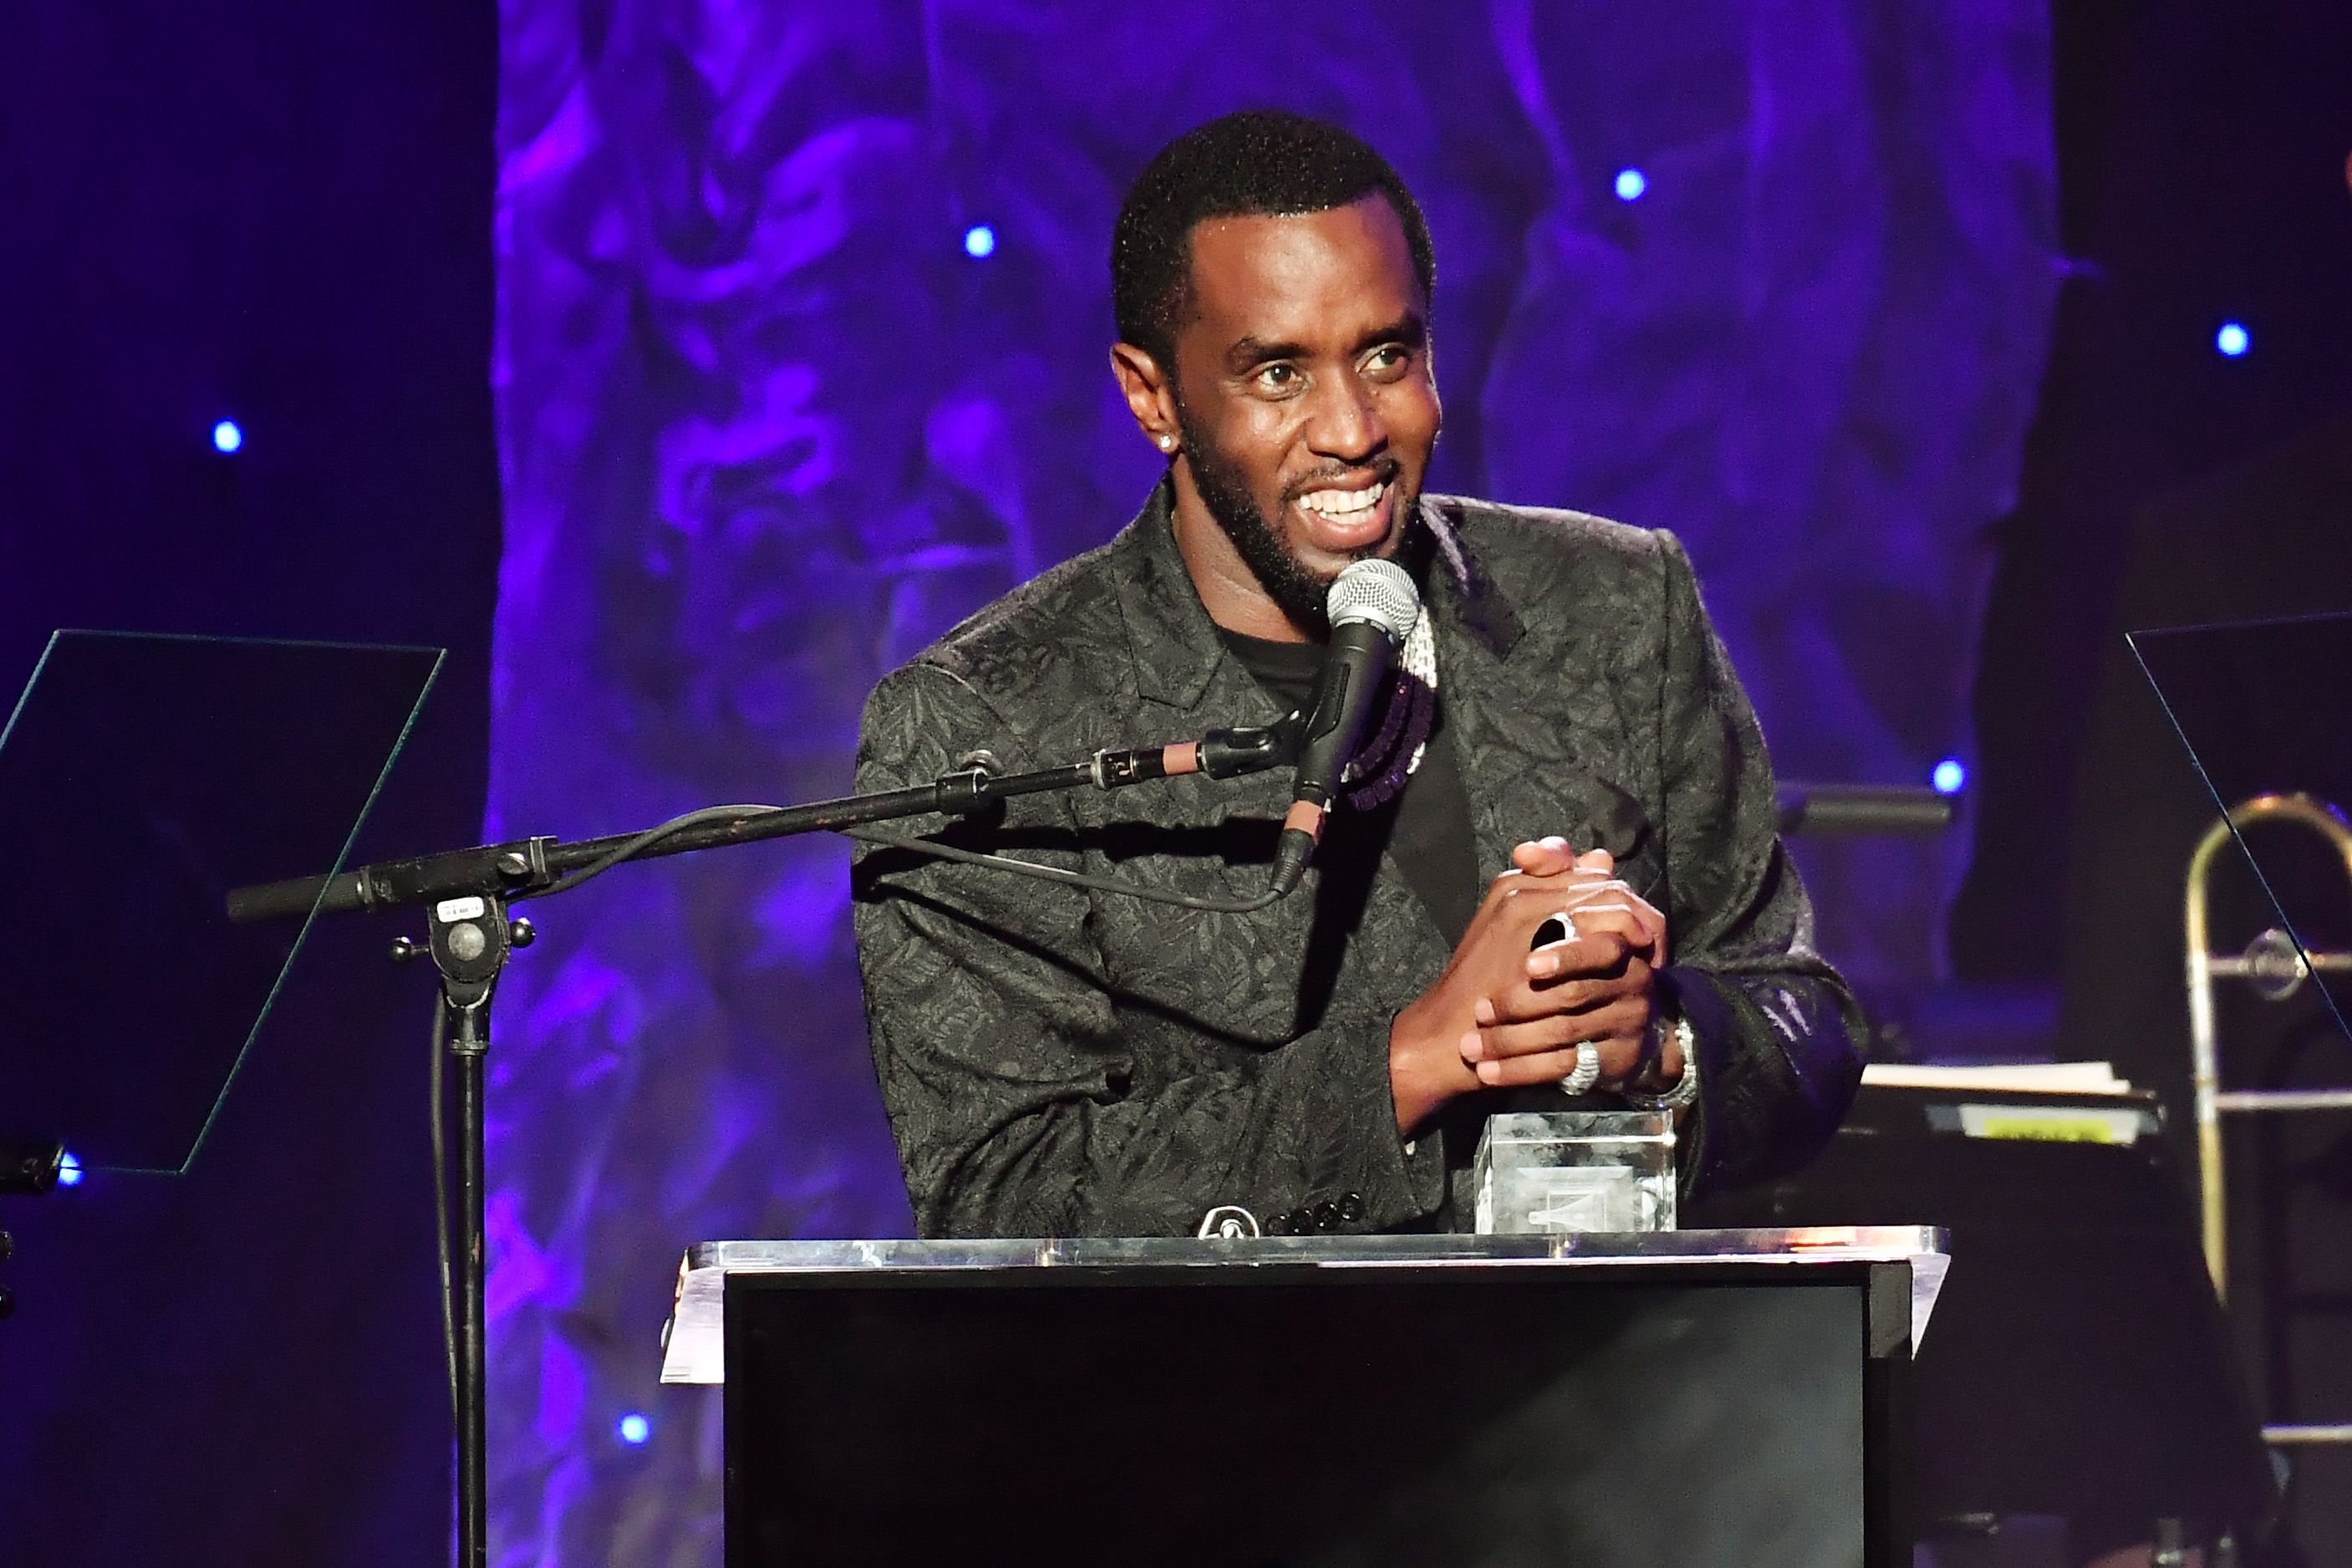 Sean "Diddy" Combs receiving the President's Merit Award at the Grammy Gala and Grammy Salute to Industry Icons on January 25, 2020 in Beverly Hills, California. | Source: Getty Images